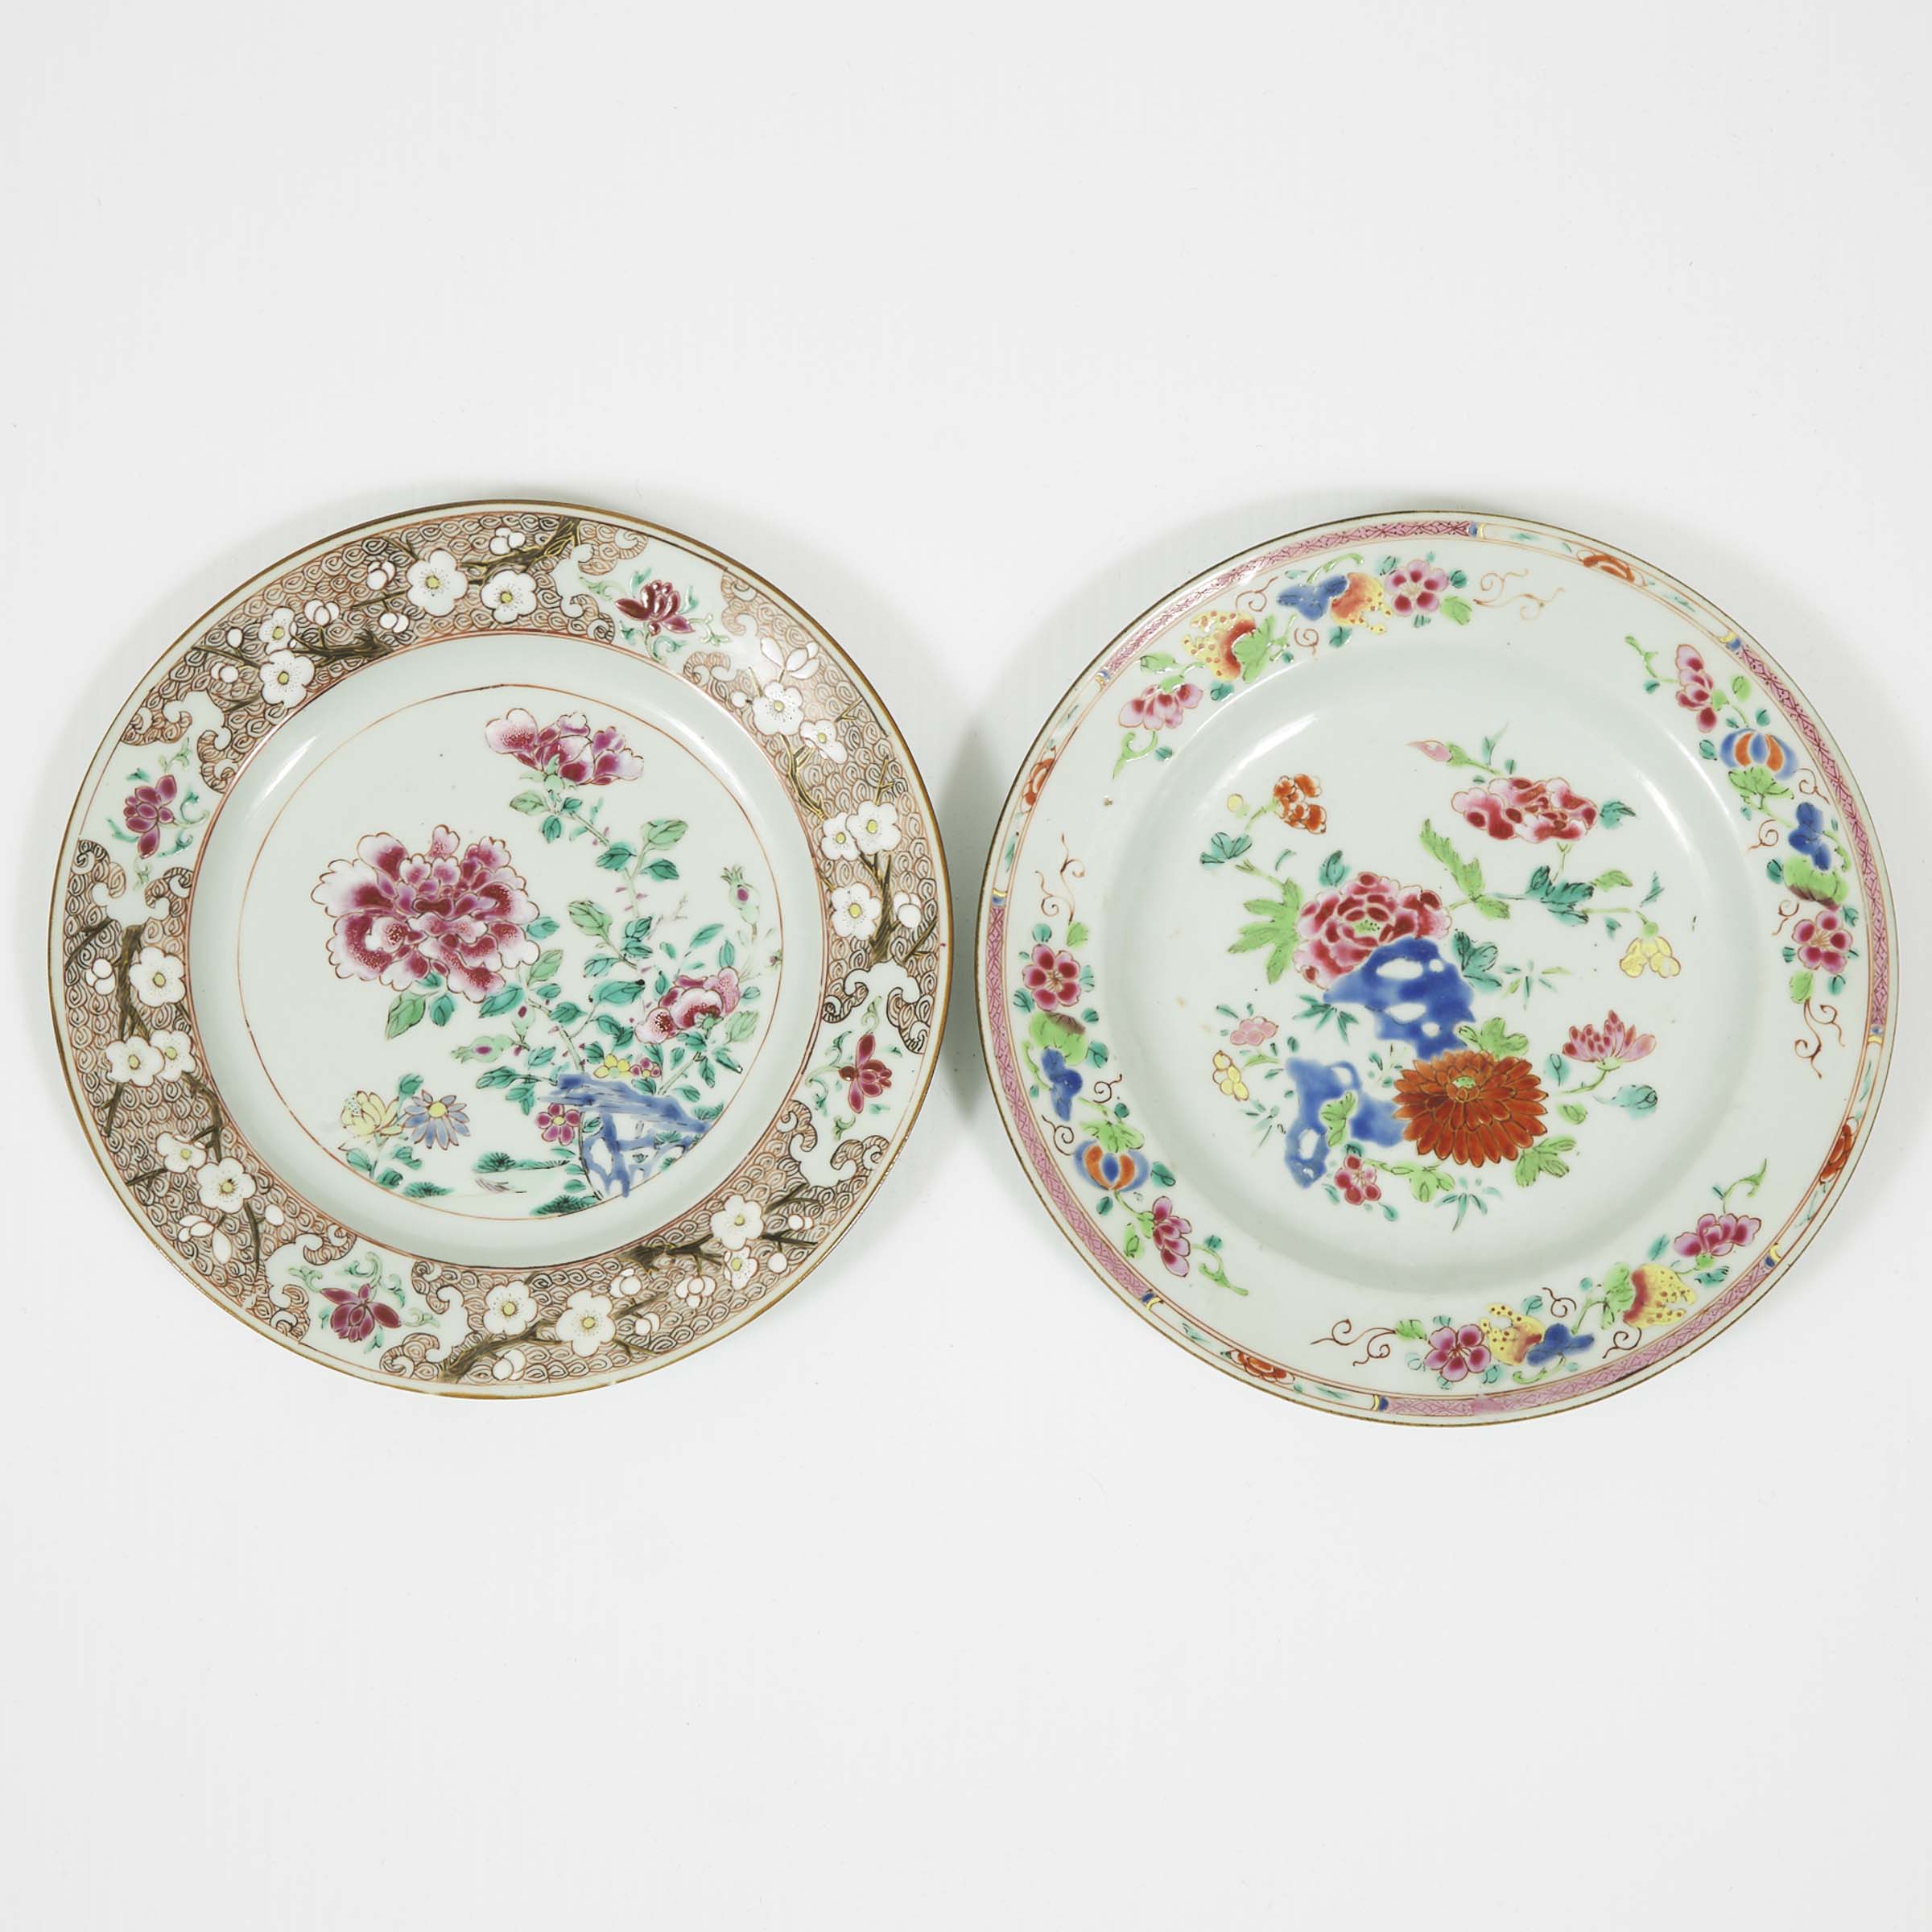 Two Famille Rose Plates with Flowers, 18th Century